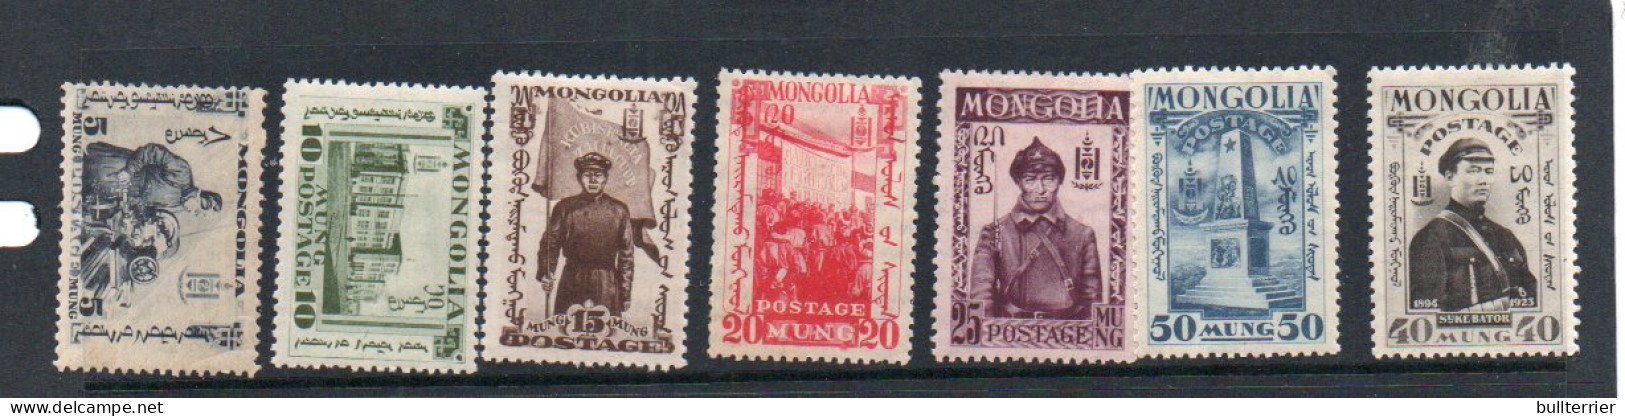 MONGOLIA - 1932 -  5MON TO 50MON MINT HINGED - VERY FINE, SELDOM OFFERED SET ,SG £22 - Mongolia